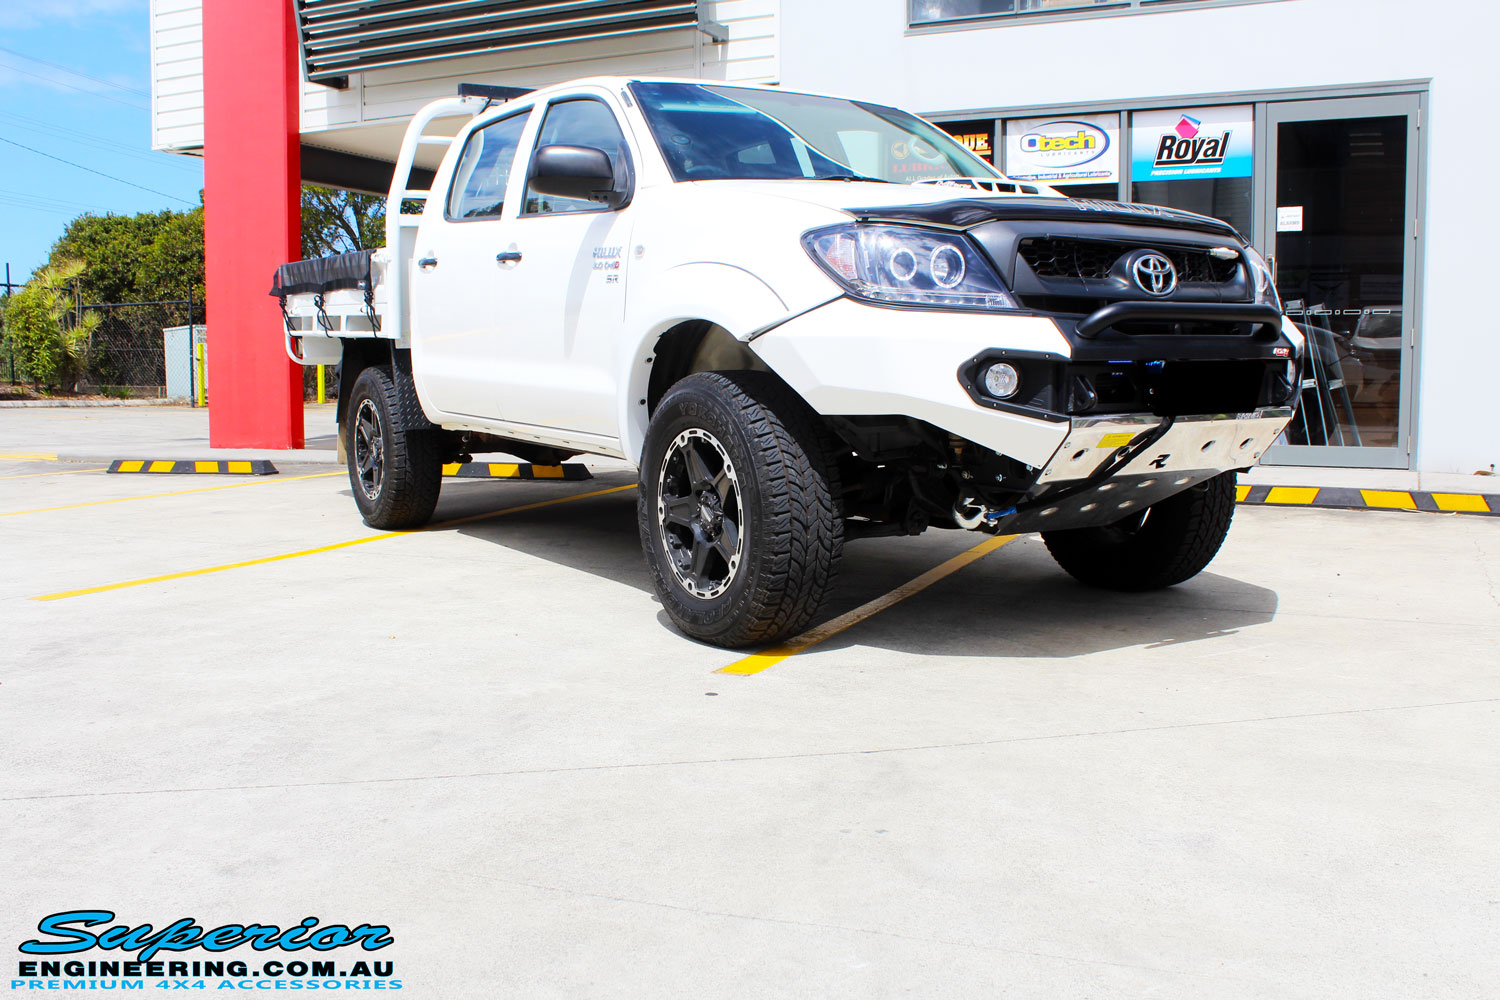 Right front side view of a Toyota Vigo Hilux Dual Cab in White after fitment of a Superior Nitro Gas 2" Inch Lift Kit, Rhino 4x4 Evolution 3D Winch Bar, VRS Winch, Legendex 409 Stainless Steel 3" Exhaust, Legendex Thrust Monkey Throttle Control, Legendex Rock Sliders, Legendex Optimizer Remap Service, Stainless Snorkel & Nitto Trail Grappler Tyres